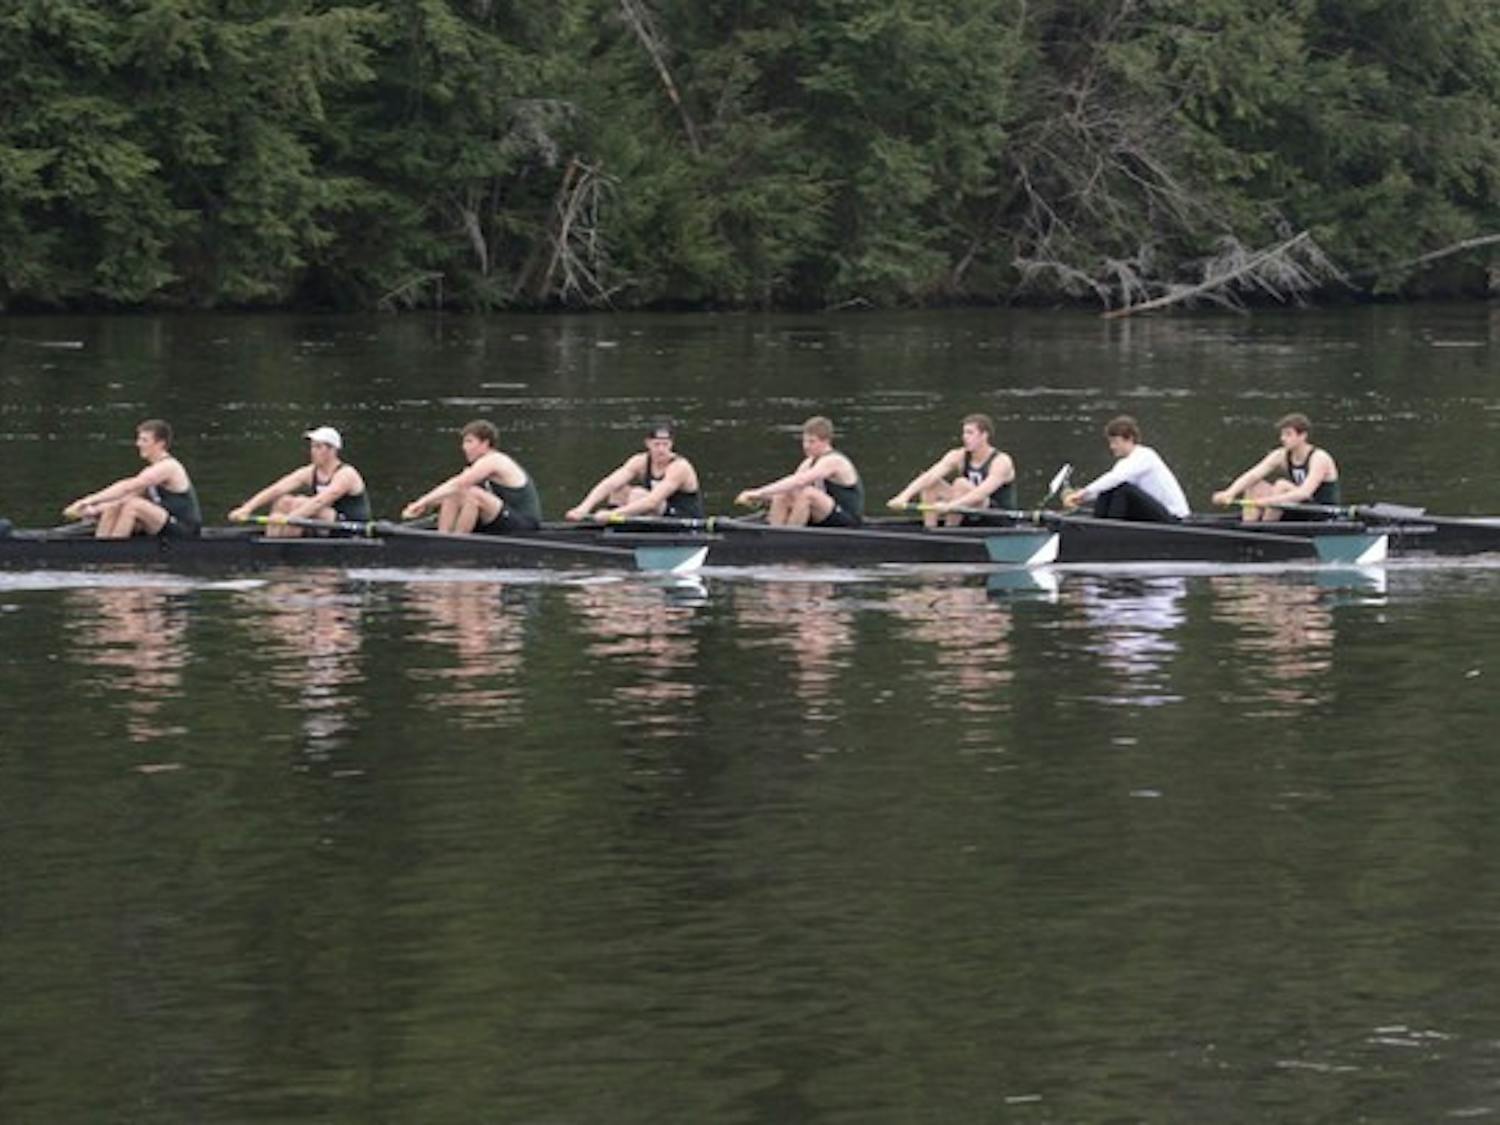 The Big Green men's crew teams will cap off their seasons this weekend as they compete in the Eastern Sprints in Worcester, Mass.